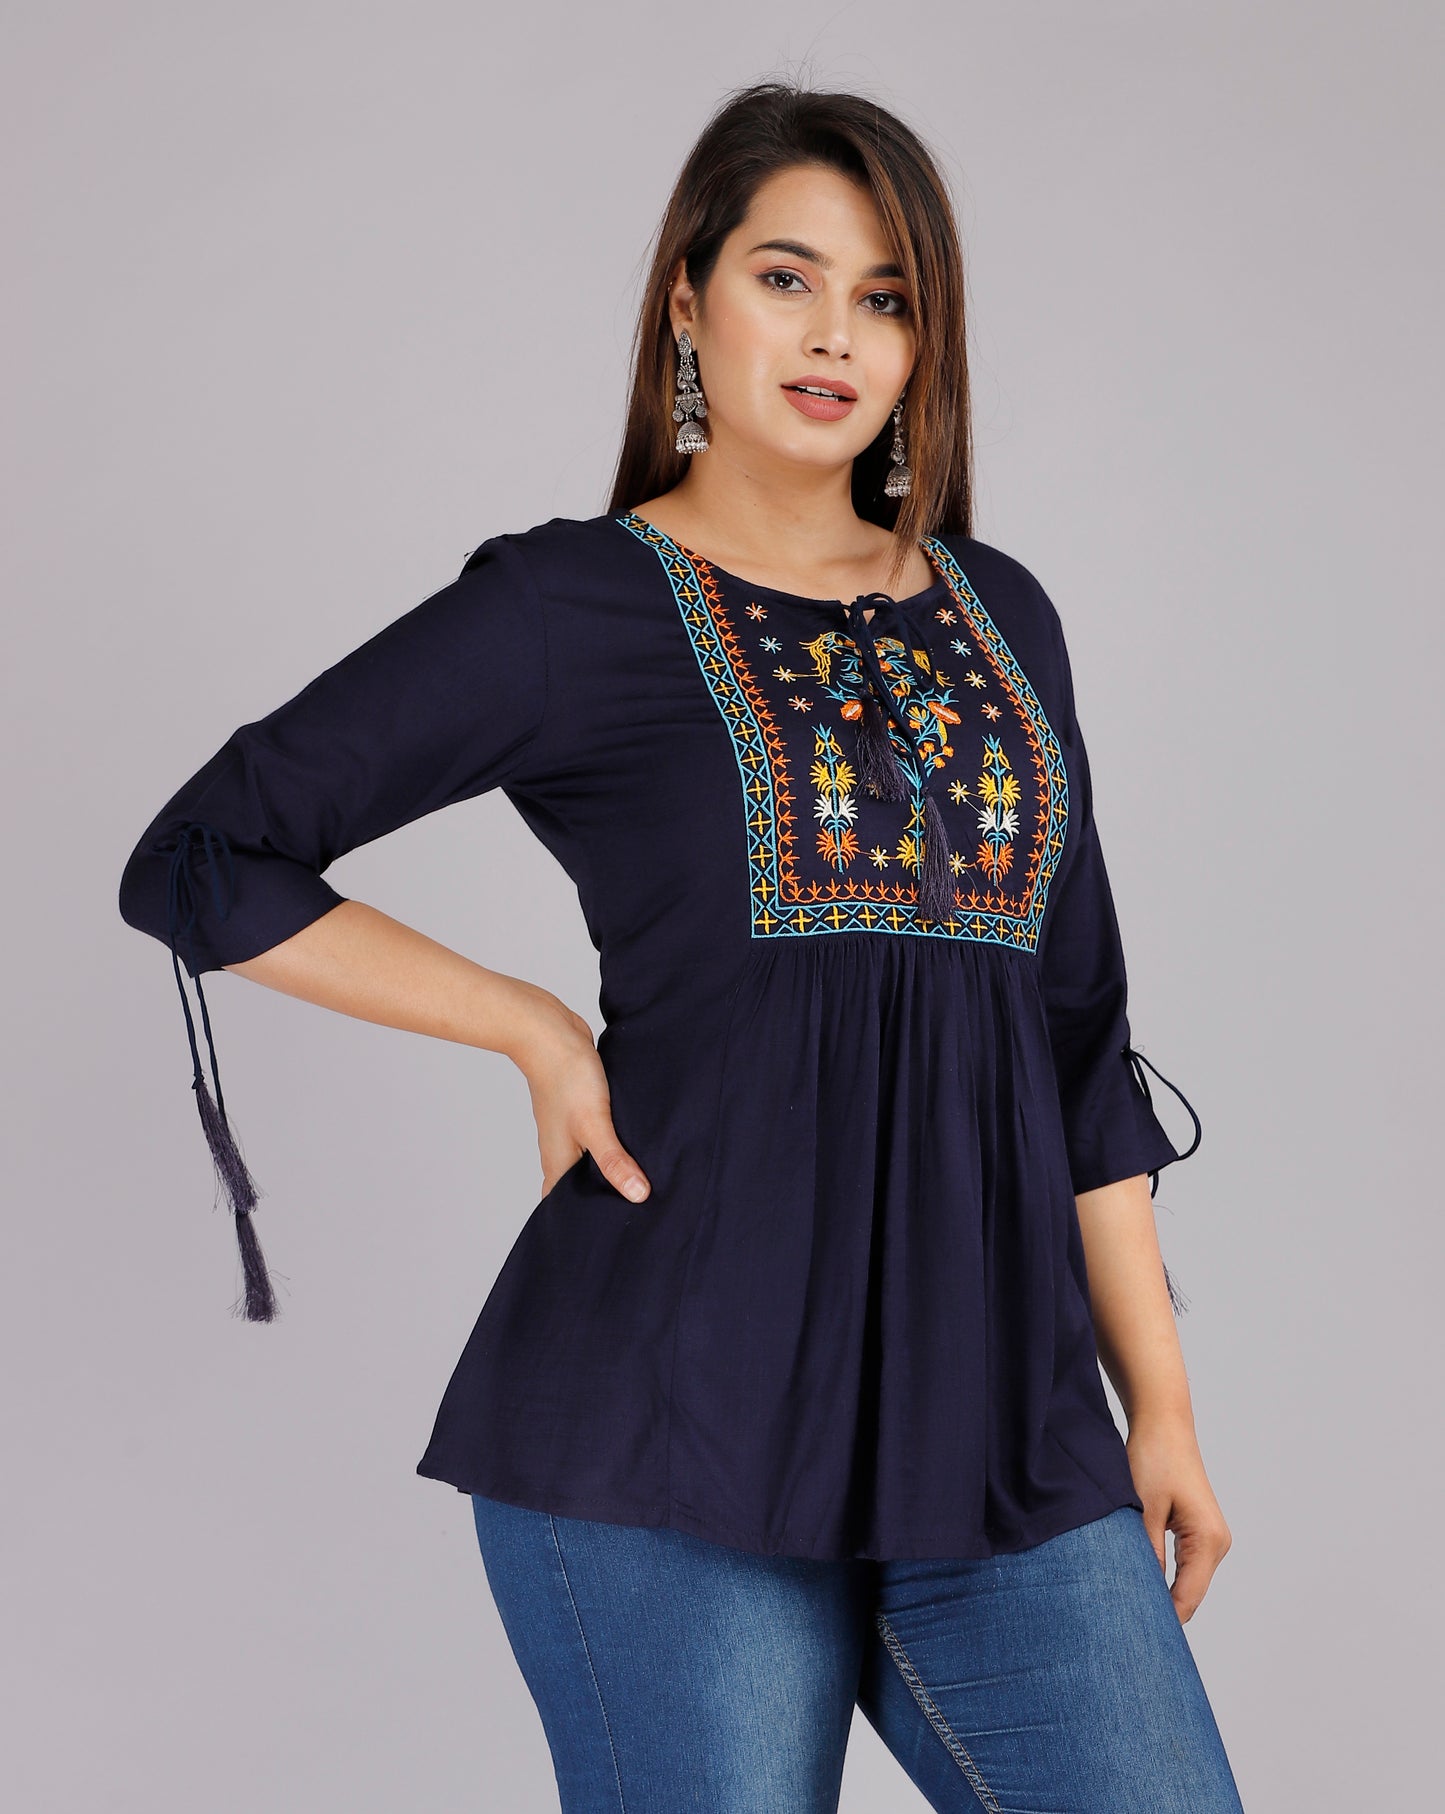 Solid Navy Blue Color 3/4th Sleeve Embroidered Top